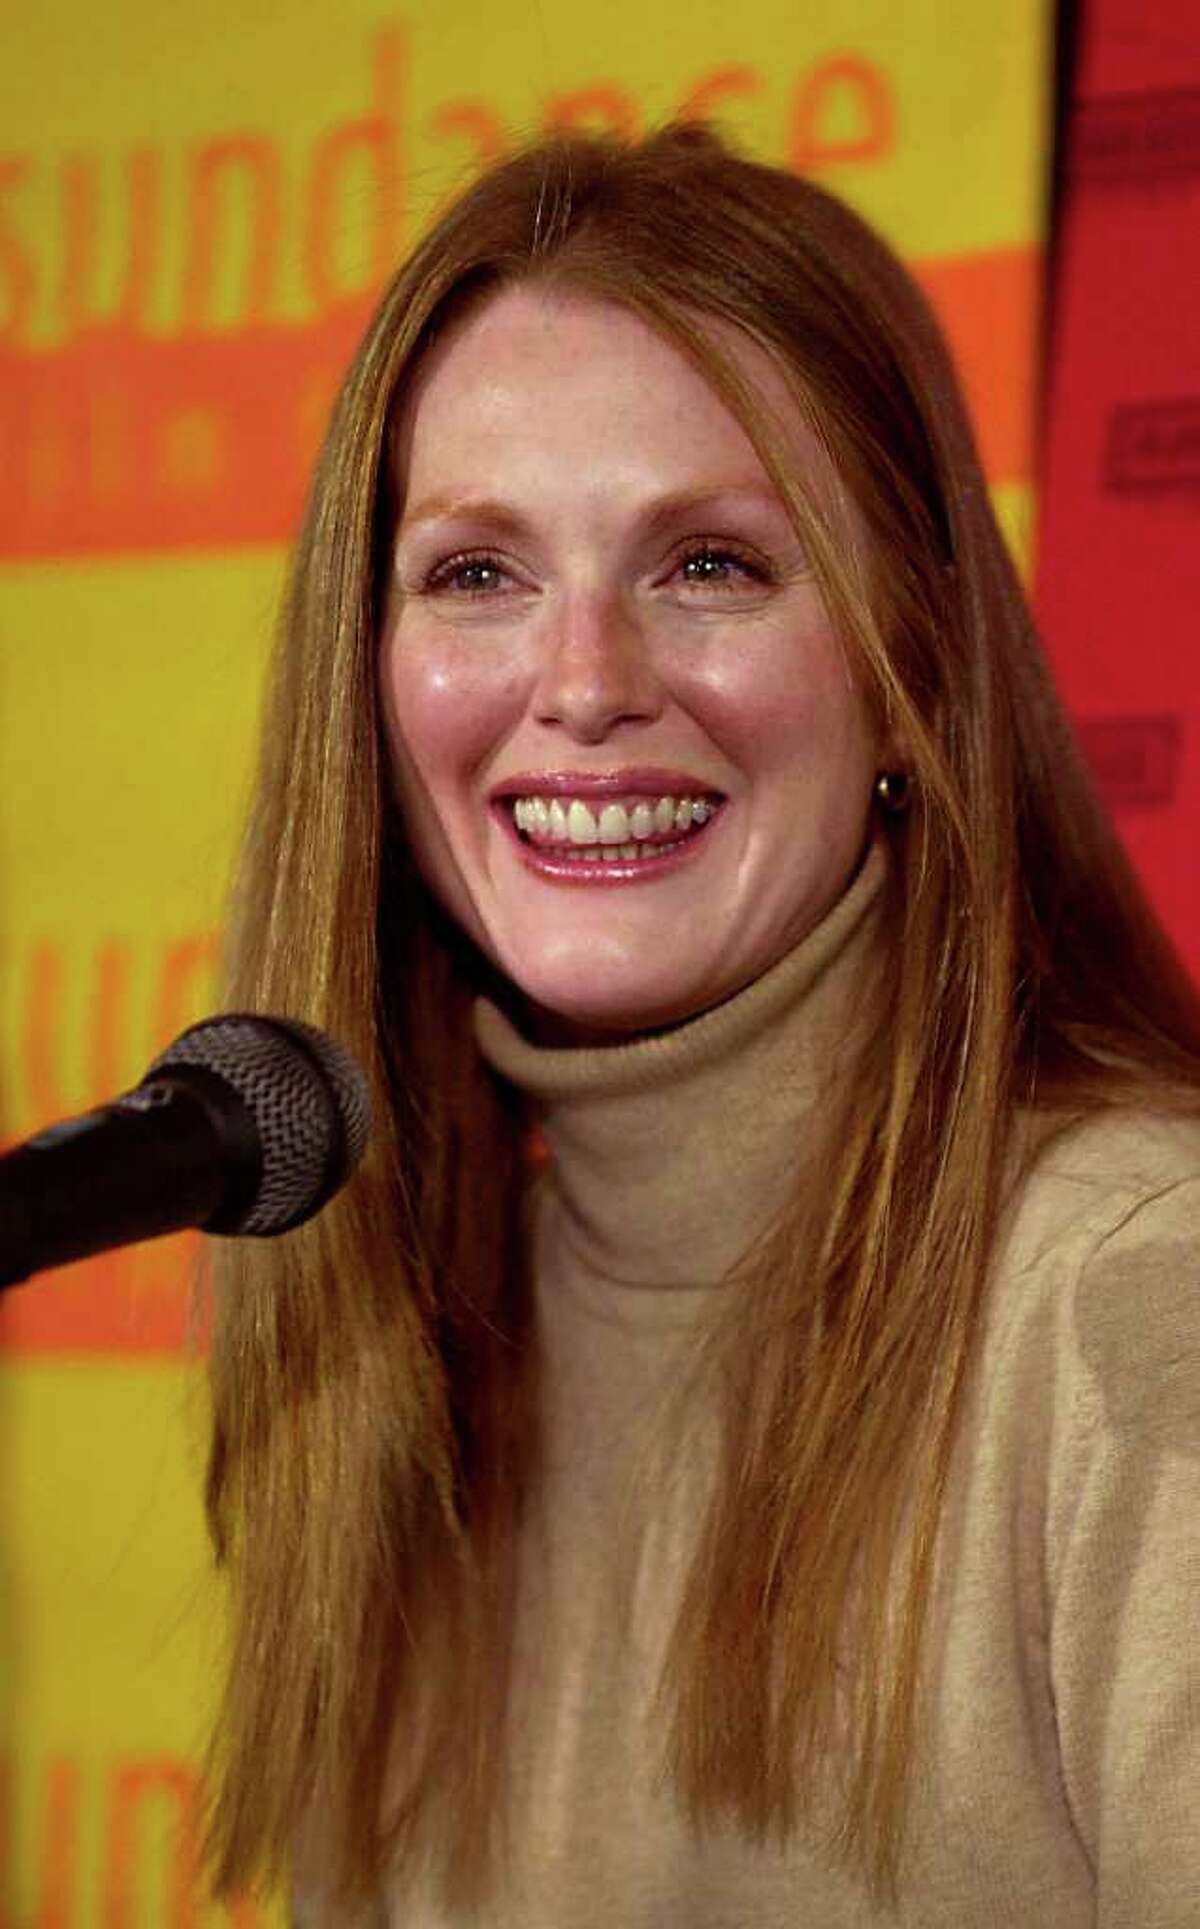 ** FILE ** Actress Julianne Moore answers questions during a news conference at the Sundance Film Festival in Park City, Utah, in this Jan. 20, 2001, file photo. Moore will receive the actor award at the 2002 Gotham Awards, given out by the Independent Feature Project, on Sept. 26. The award honors a New York actor who has made significant contributions to the city's film community.